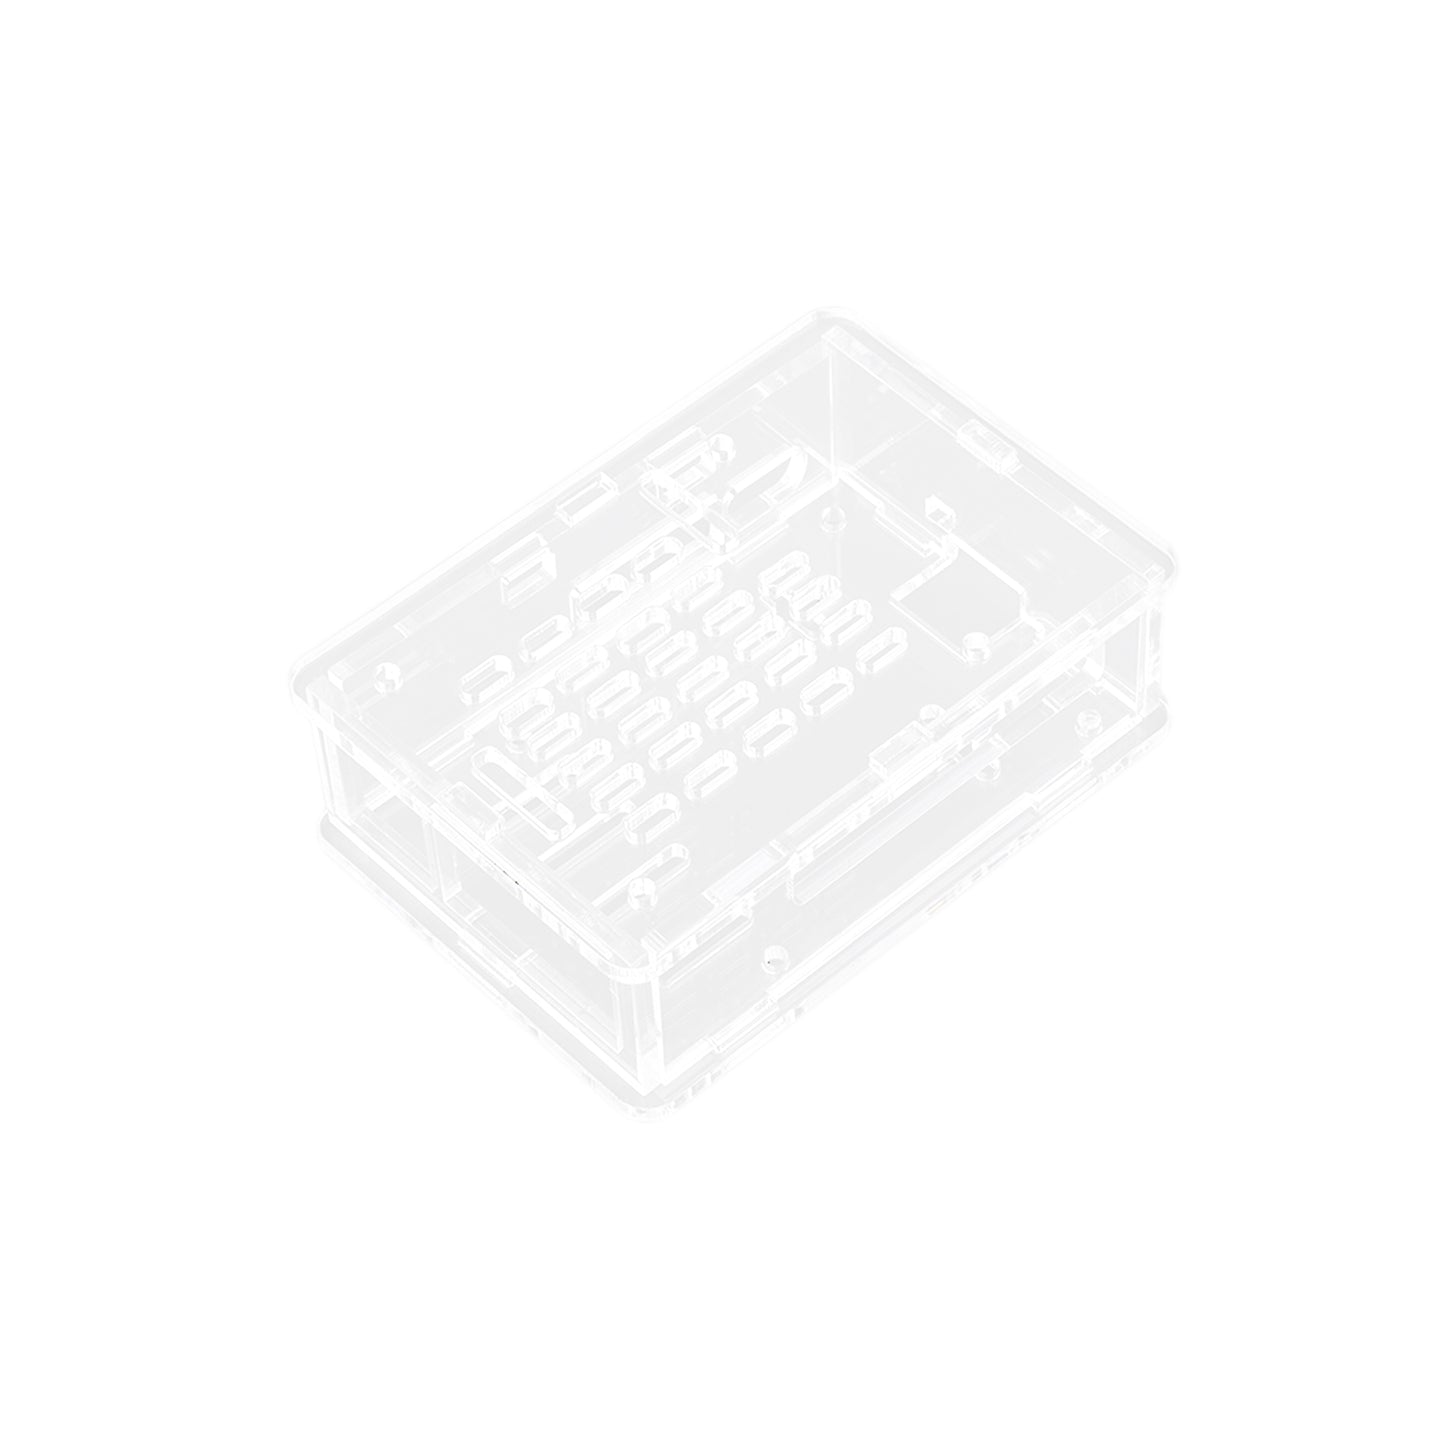 Raspberry Pi 5 Case Clear Acrylic Case for Raspberry Pi 5, Supports Installing Official Active Cooler - RS5785 - REES52